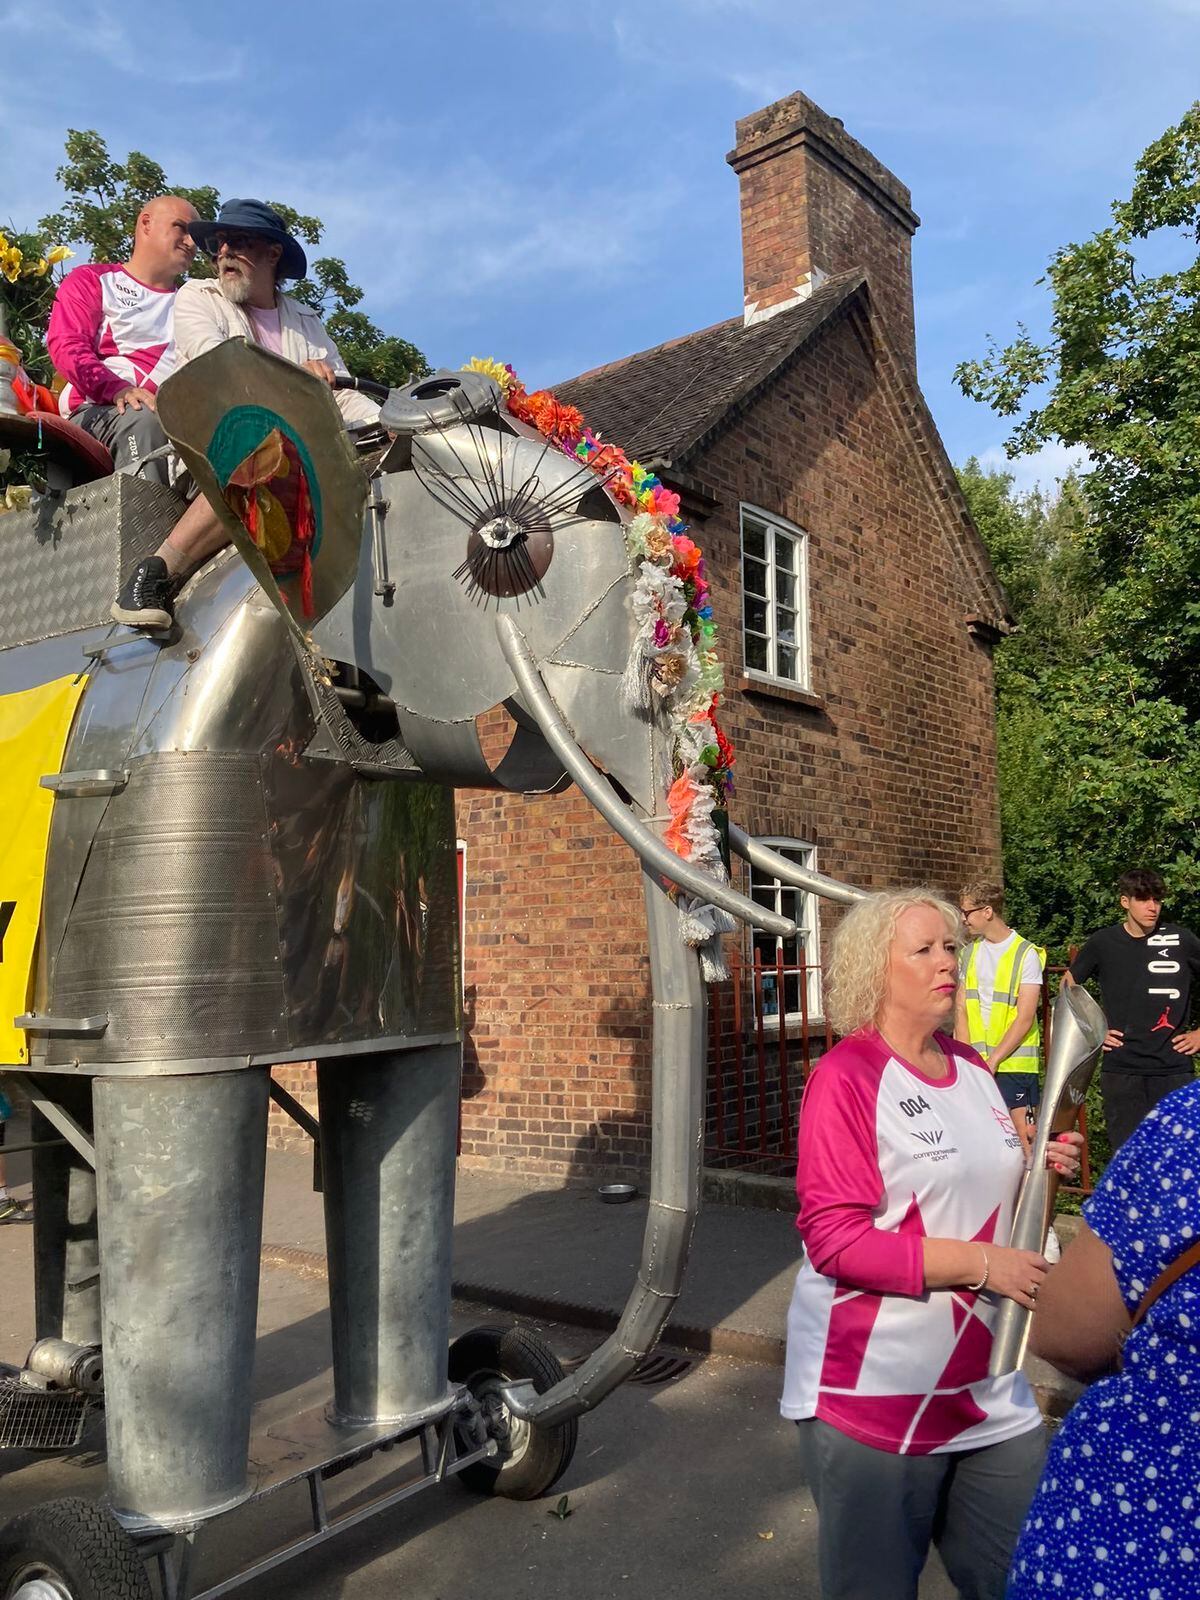 A giant metal elephant was part of the relay in Ironbridge